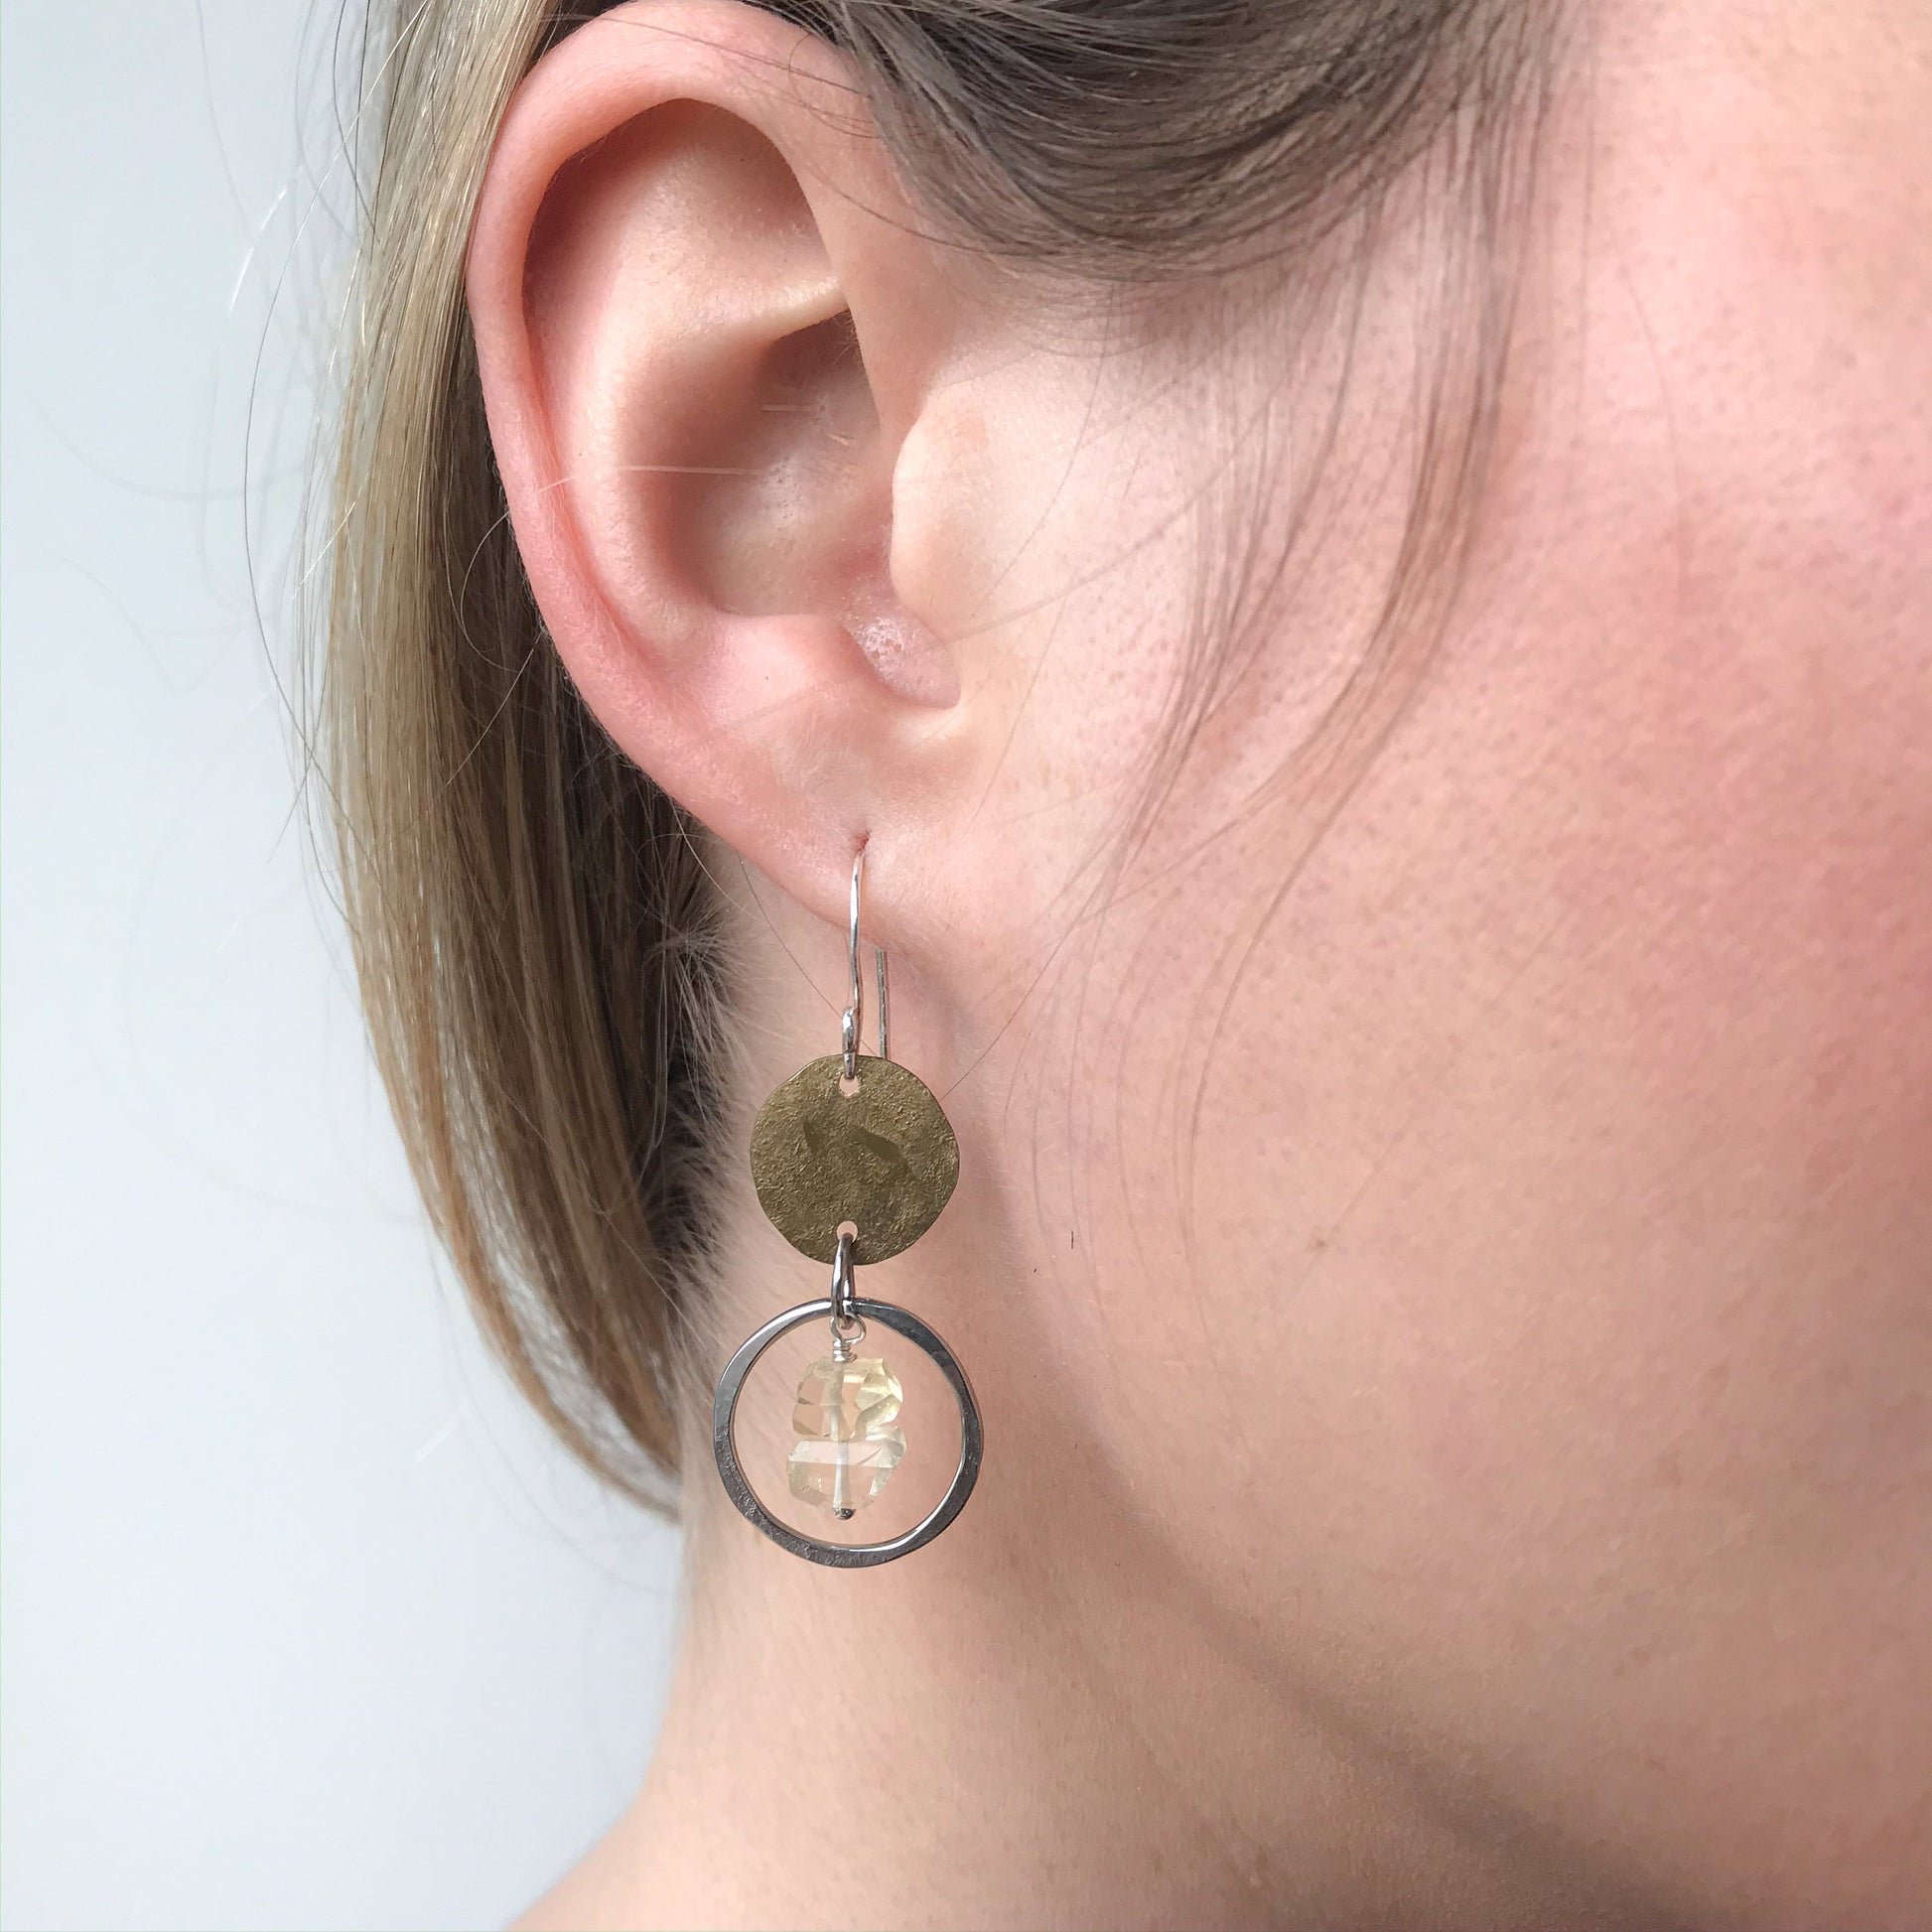 11th anniversary gift for her, citrine stainless steel and brass earrings, hammered disc earrings, hammered hoop earrings, citrine jewelry